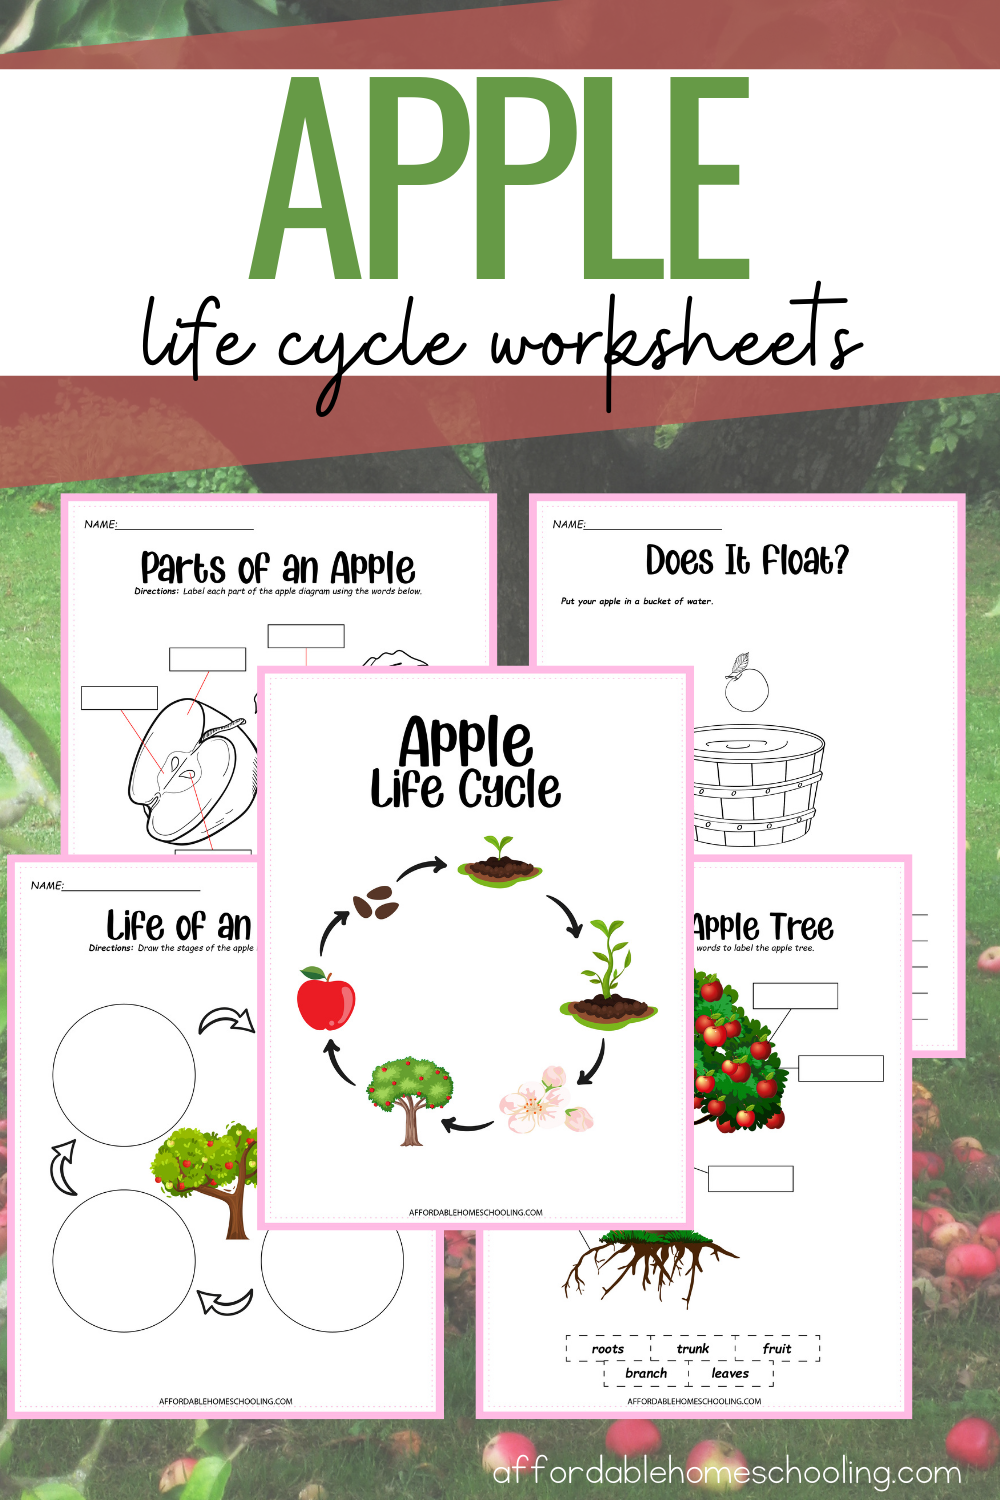 Free Printable Apple Life Cycle Worksheets for Kids